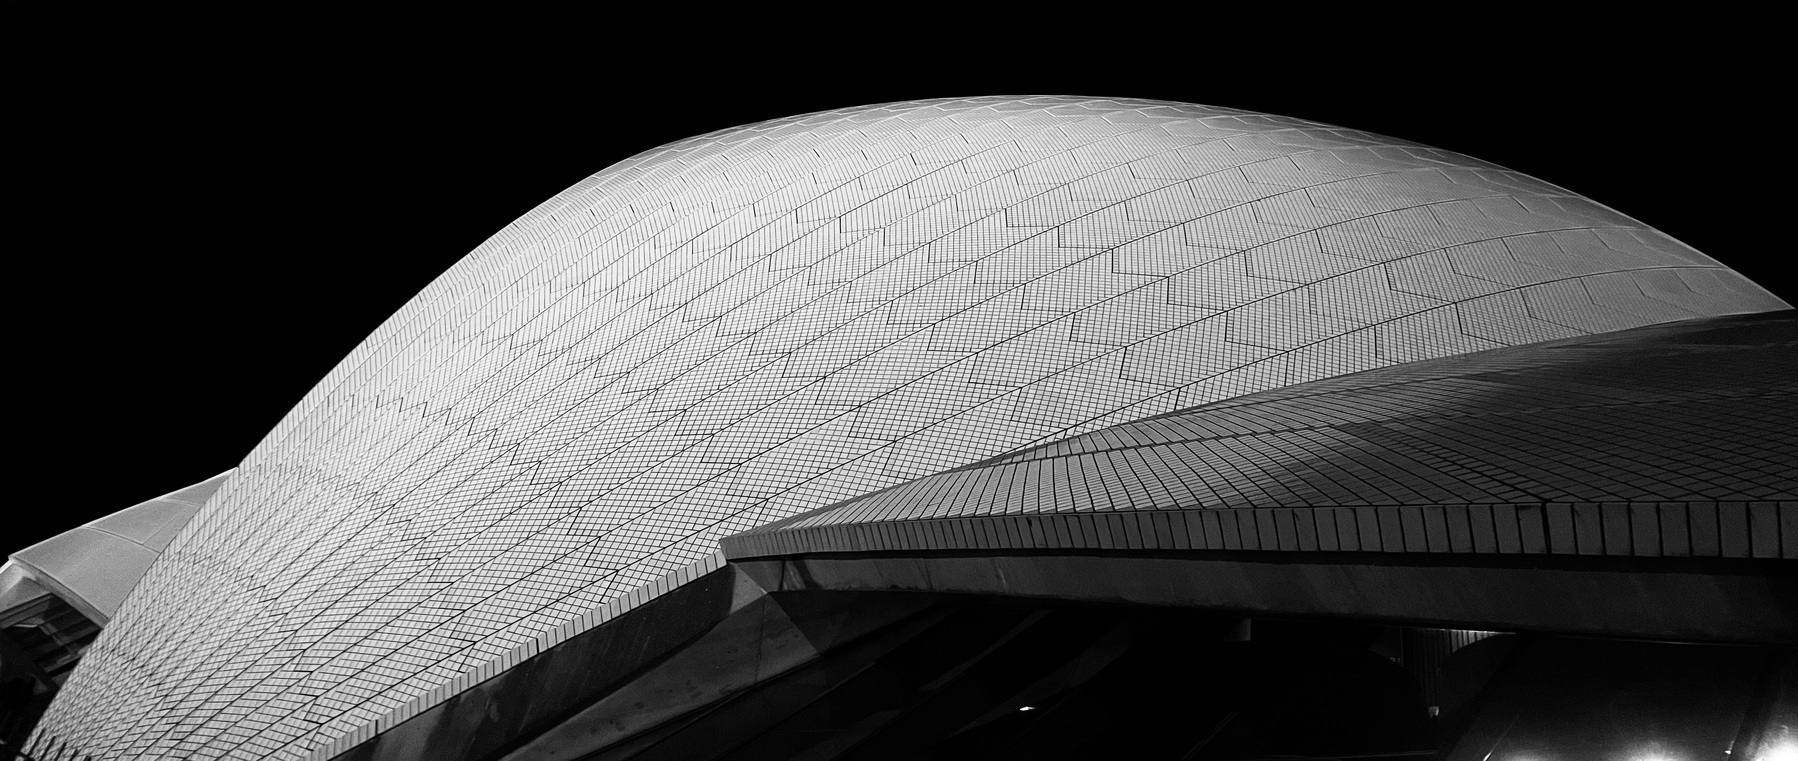 An anarmorphic black-and-white photo of the tiled roof of the Opera House